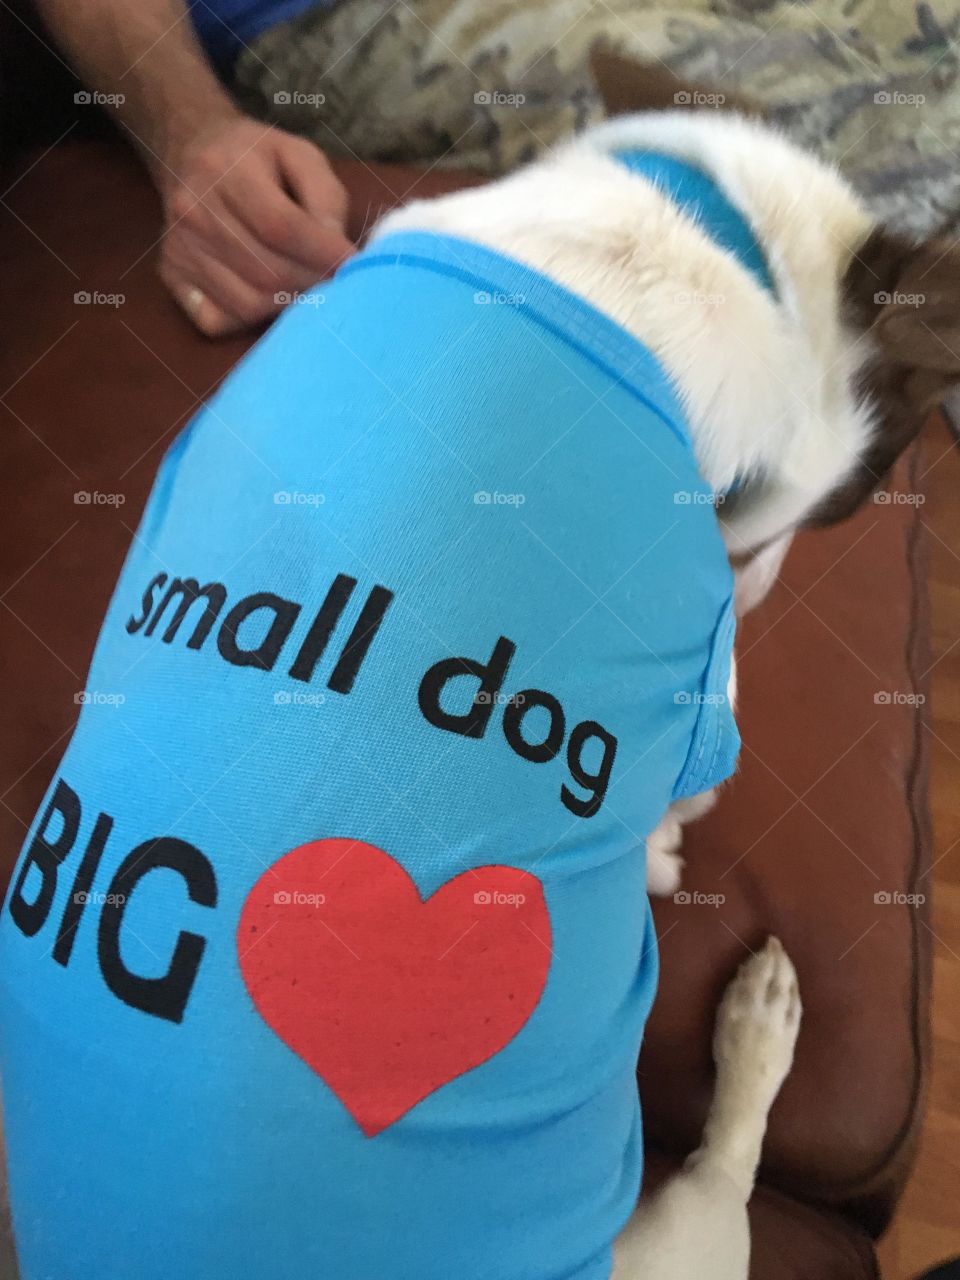 New shirt for this little guy! Just fits perfectly small dog big heart! Got it from my favorite place to shop.